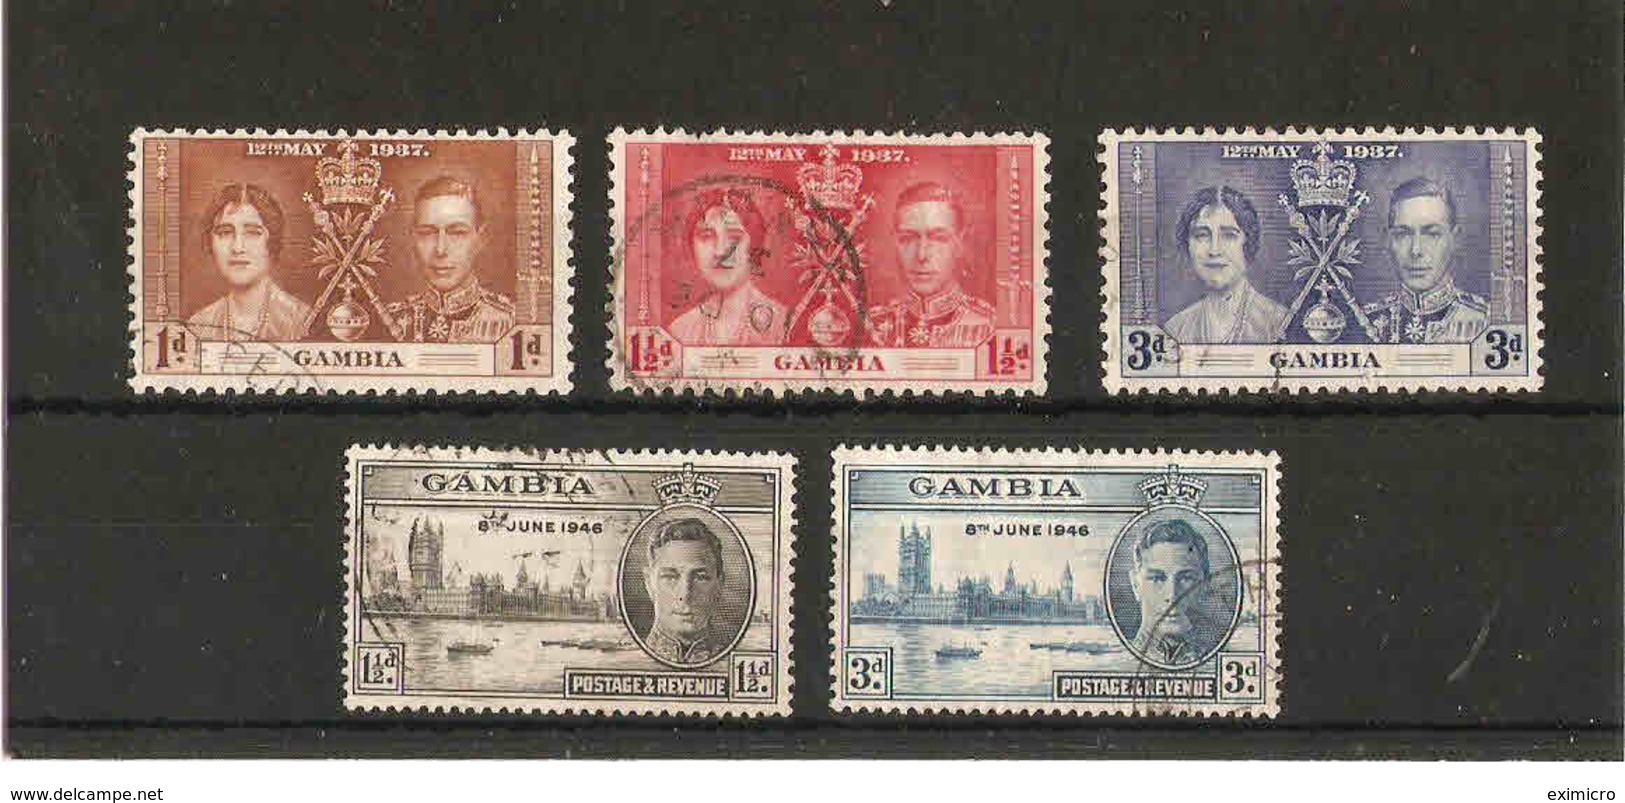 GAMBIA 1937 CORONATION And 1946 VICTORY SETS FINE USED Cat £5.40 - Gambie (...-1964)